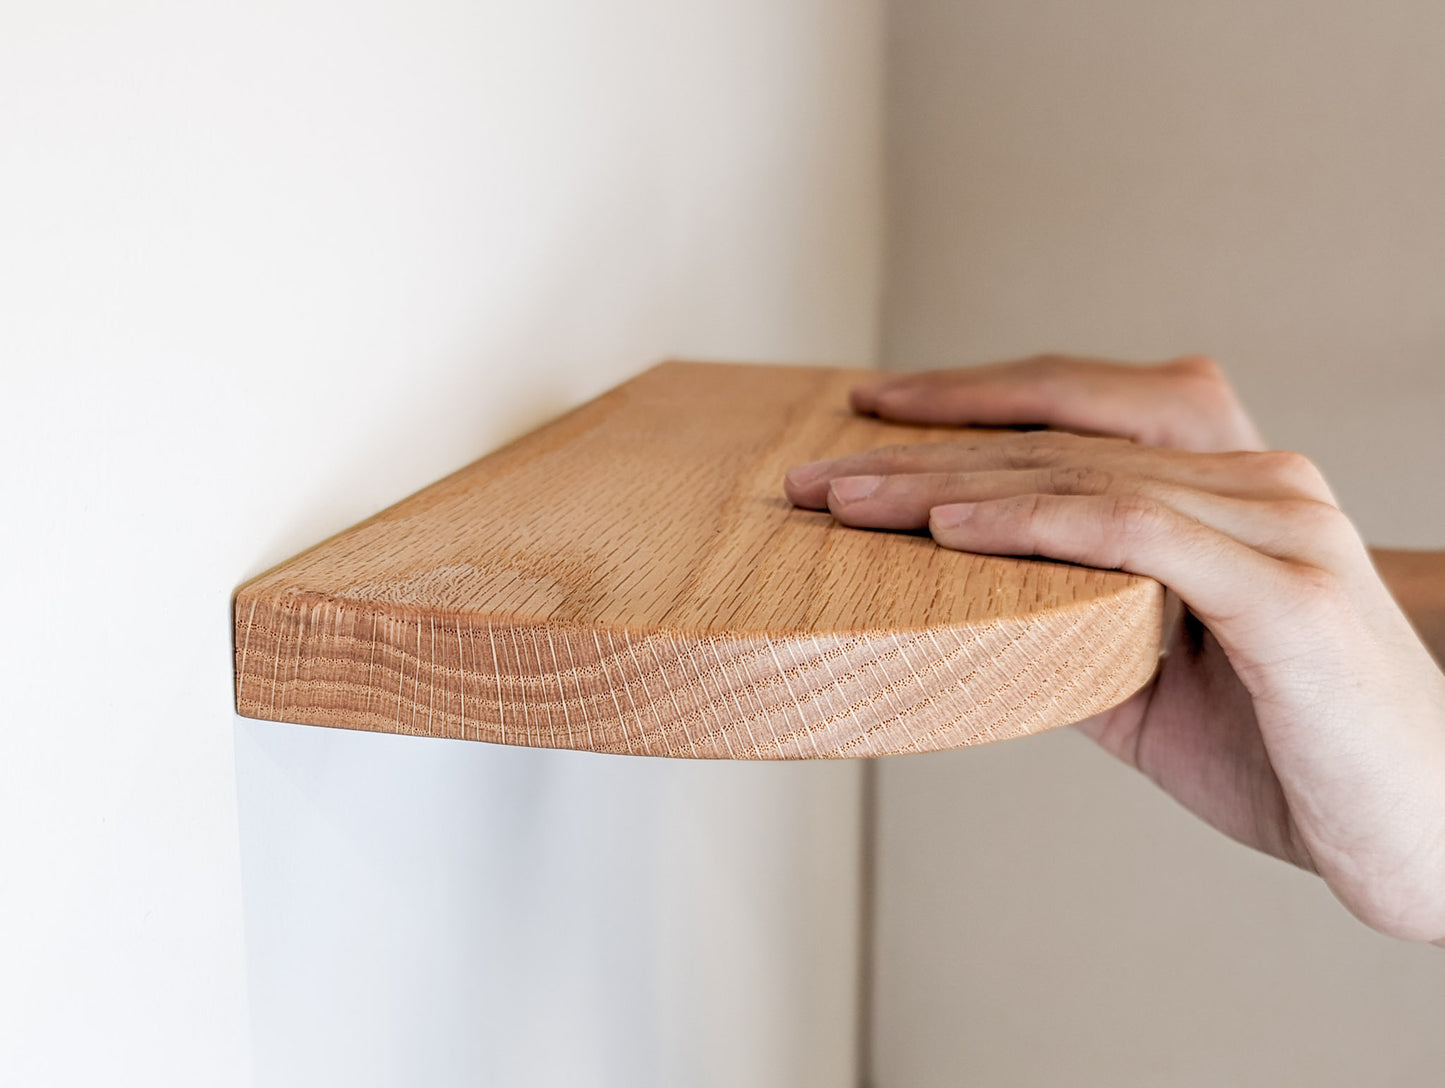 Two hands rest on an oak shelf with rounded corners against the wall